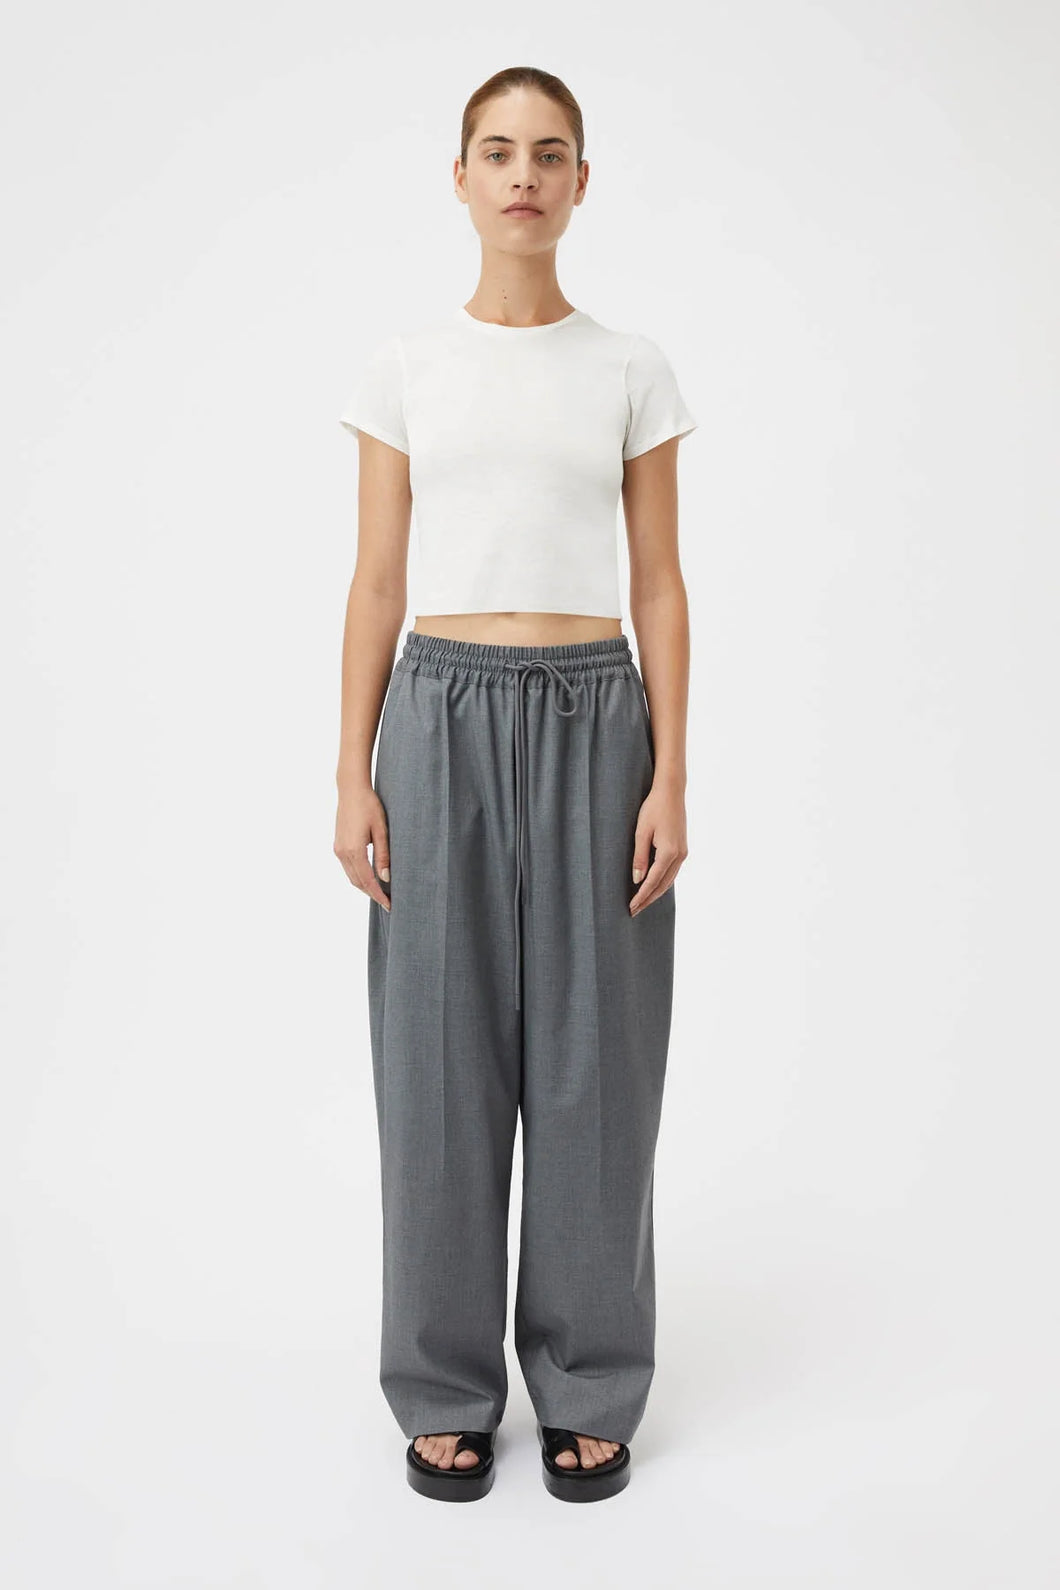 Camilla & Marc Zephyr Relaxed Pant - Grey  Hyde Boutique   